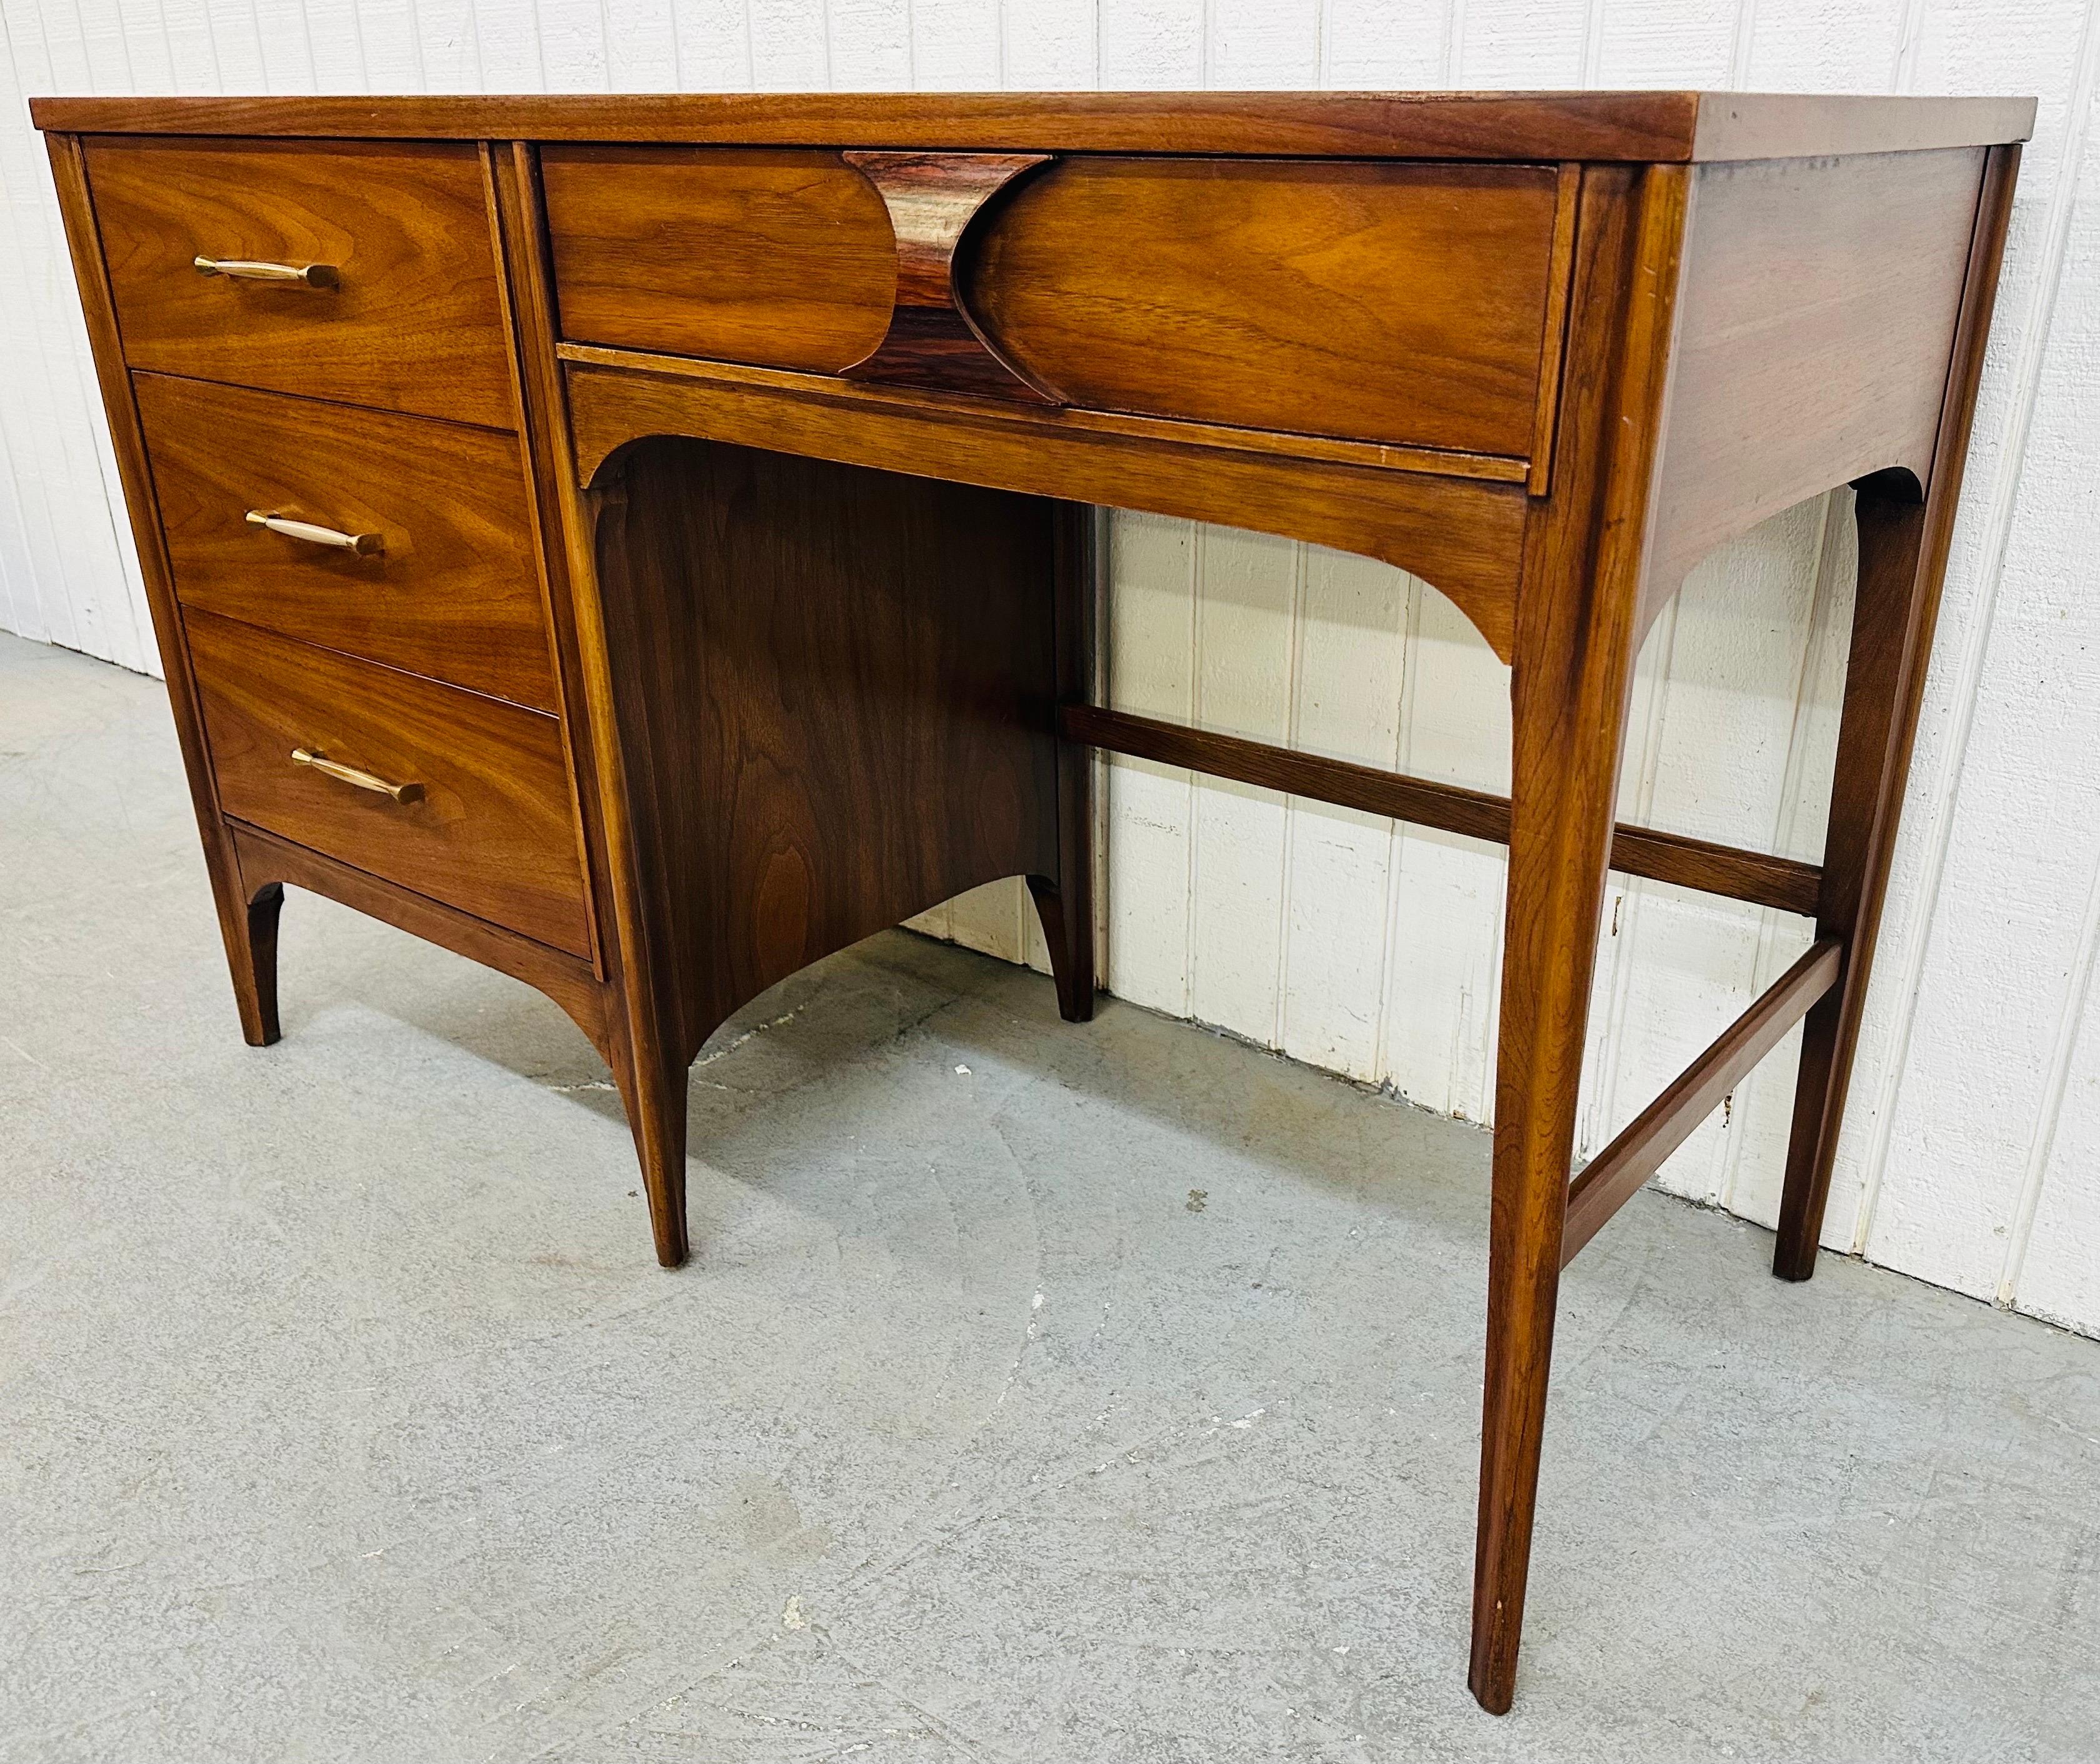 This listing is for a Mid-Century Modern Kent Coffey Perspecta Walnut Desk. Featuring a straight line design with a rectangular top, three drawers on the left with original hardware, a single drawer on the right with the iconic Perspecta rosewood